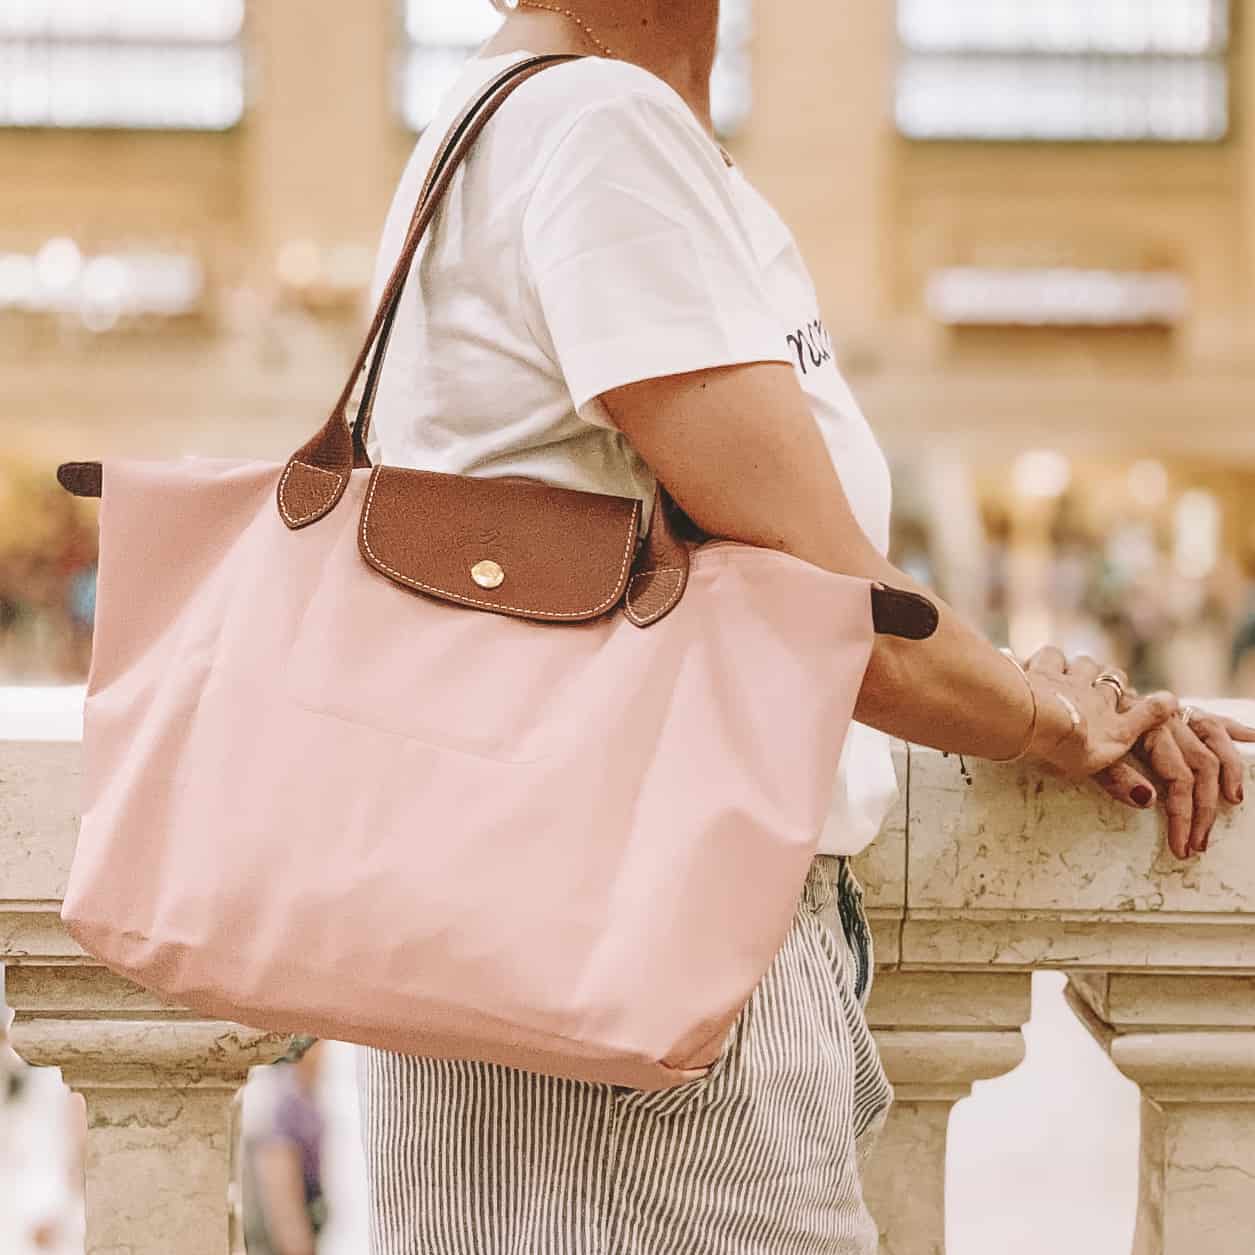 why the Longchamp bag is popular